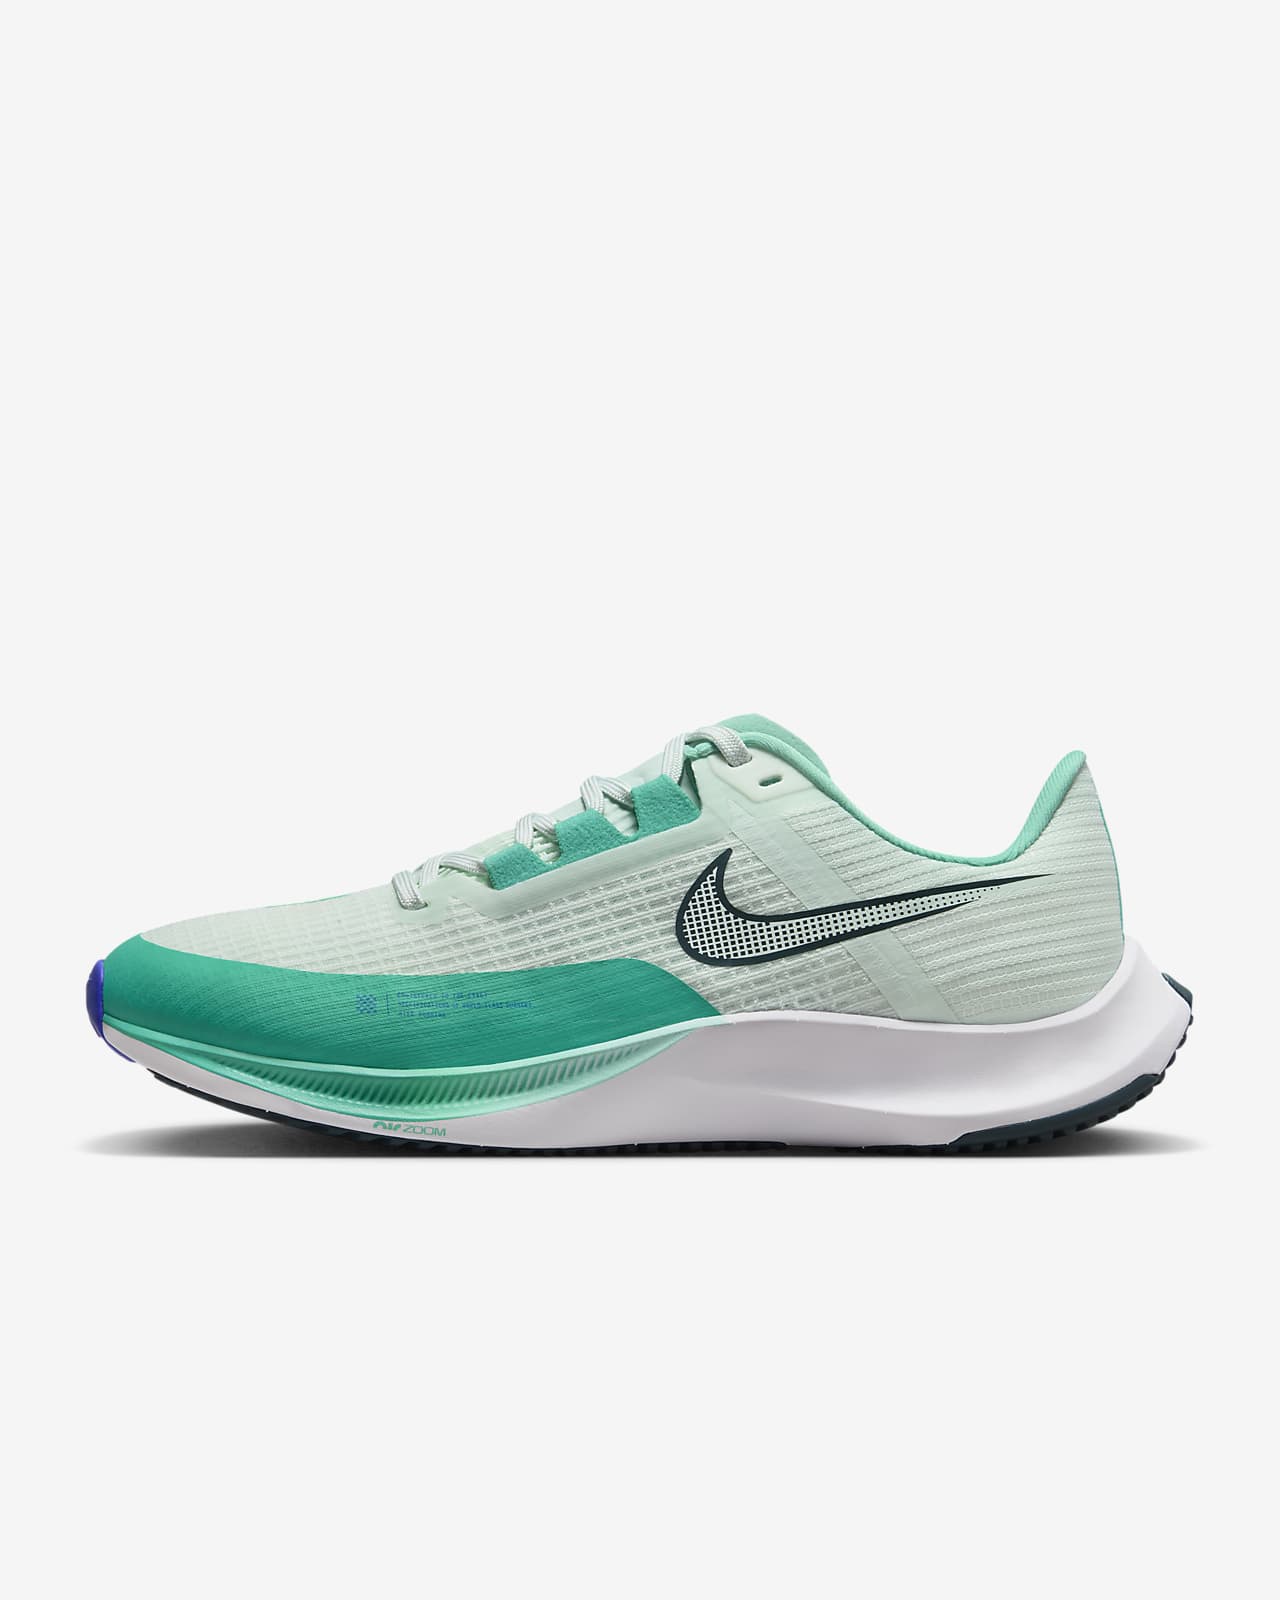 Nike Rival Fly 3 Men's Road Racing Shoes